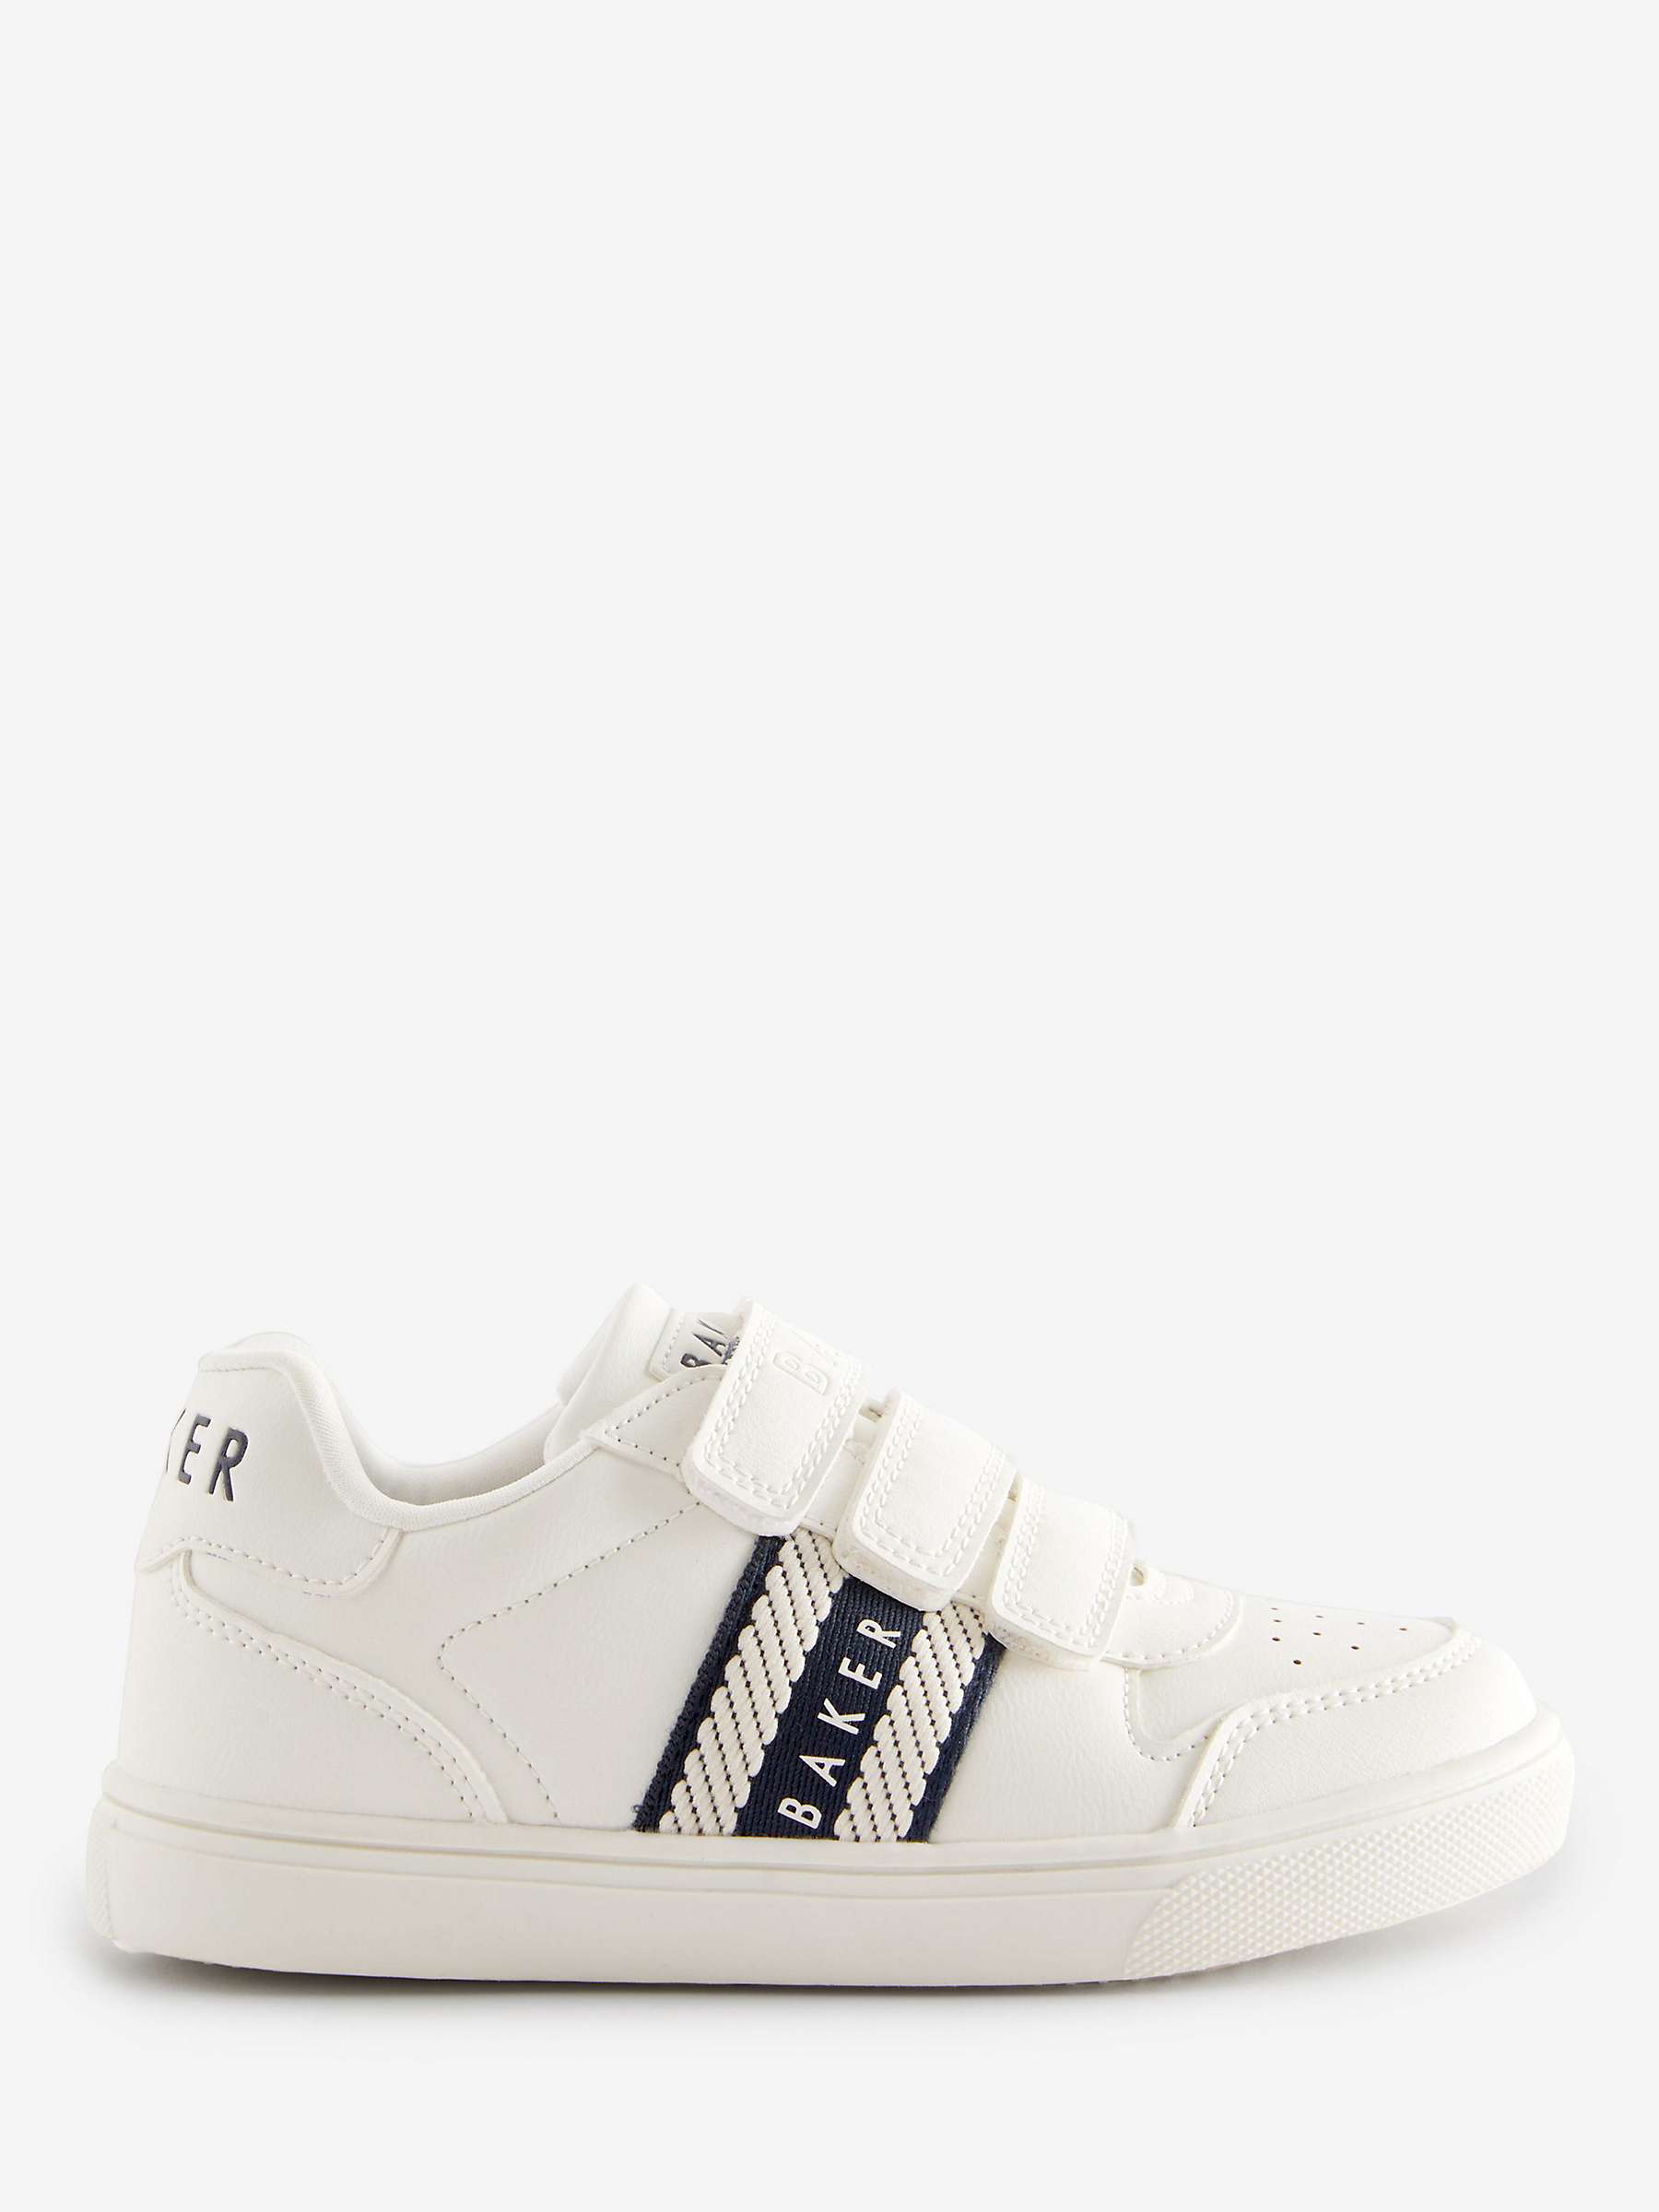 Buy Ted Baker Kids' Logo Taped Trainers, White Online at johnlewis.com